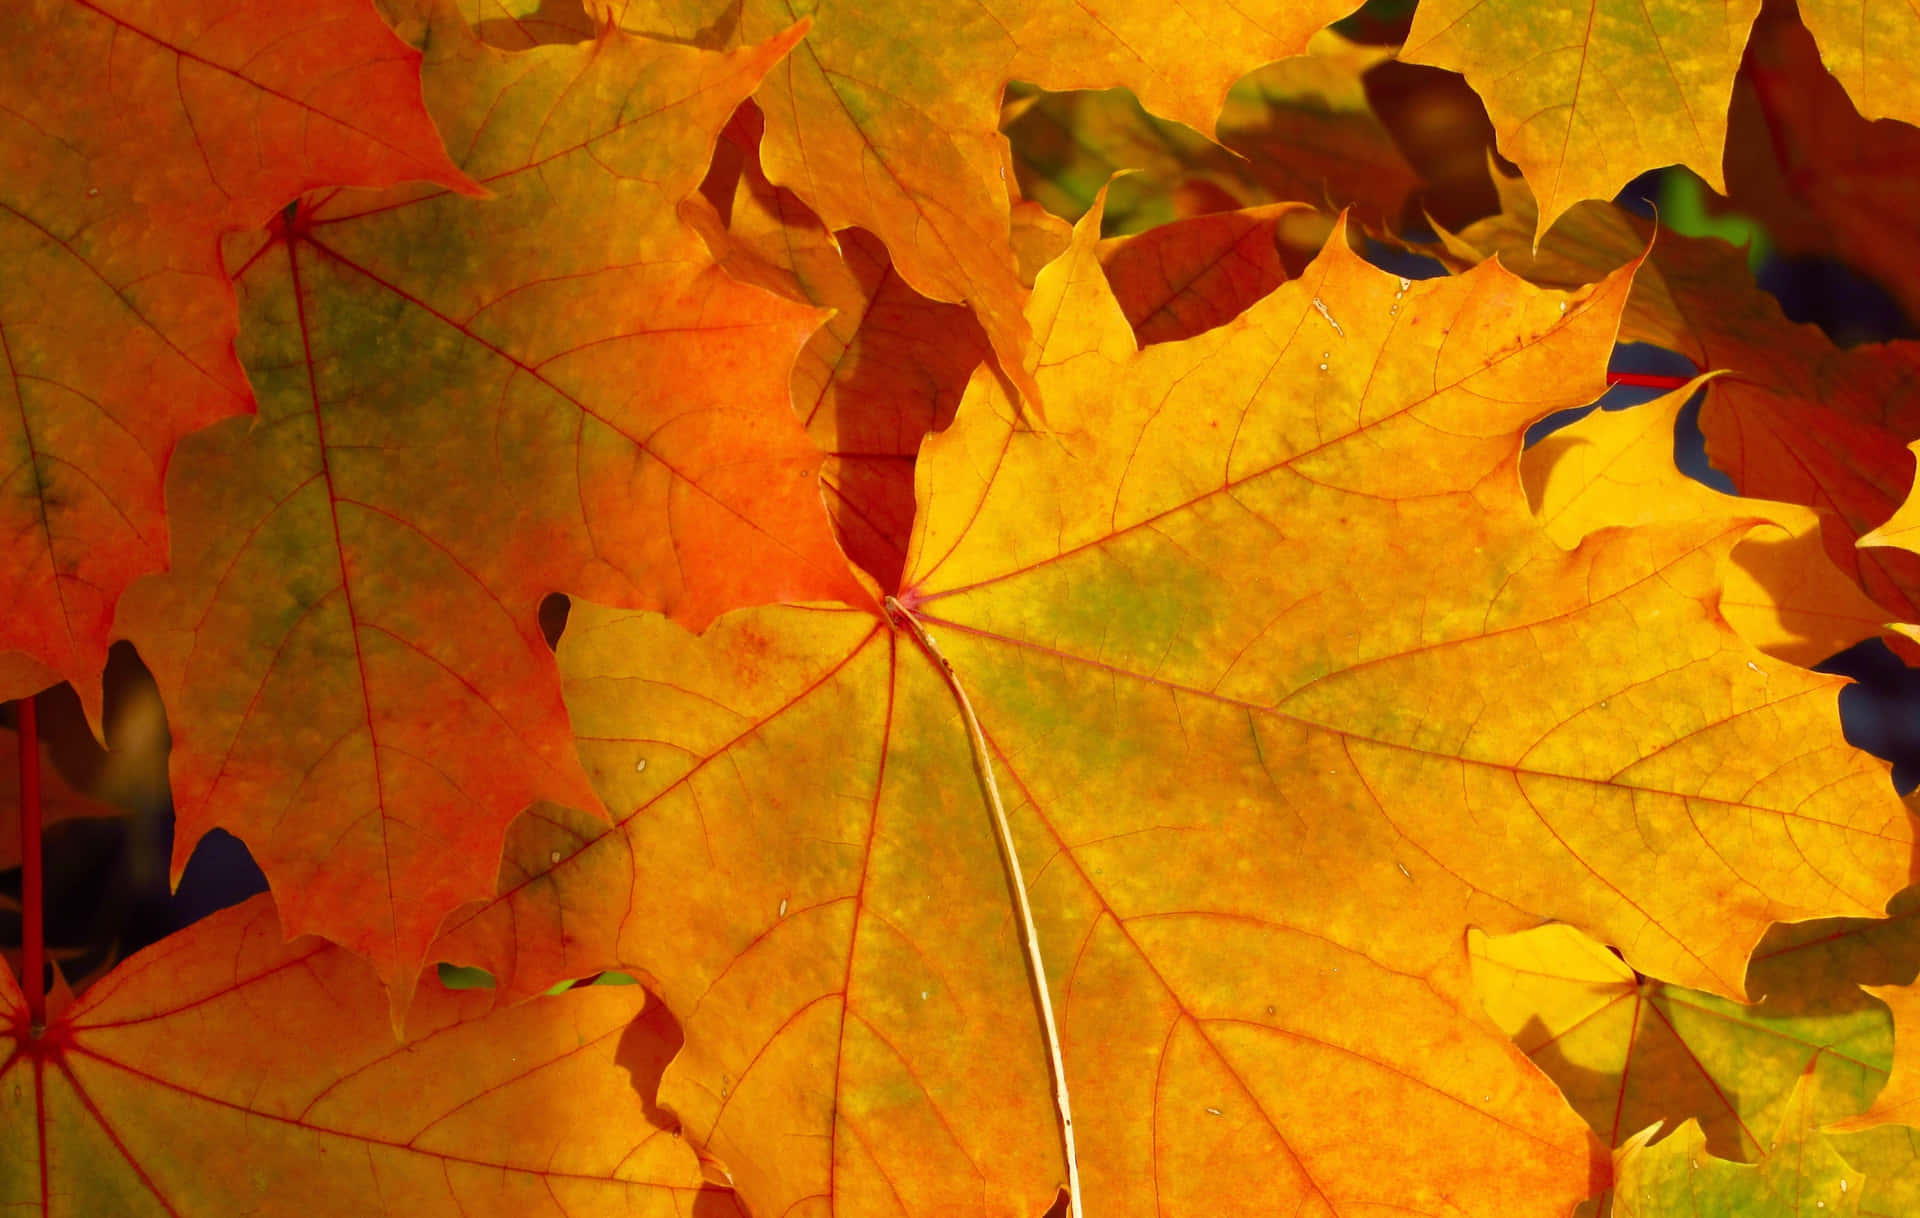 A Close Up Of Many Leaves In The Fall